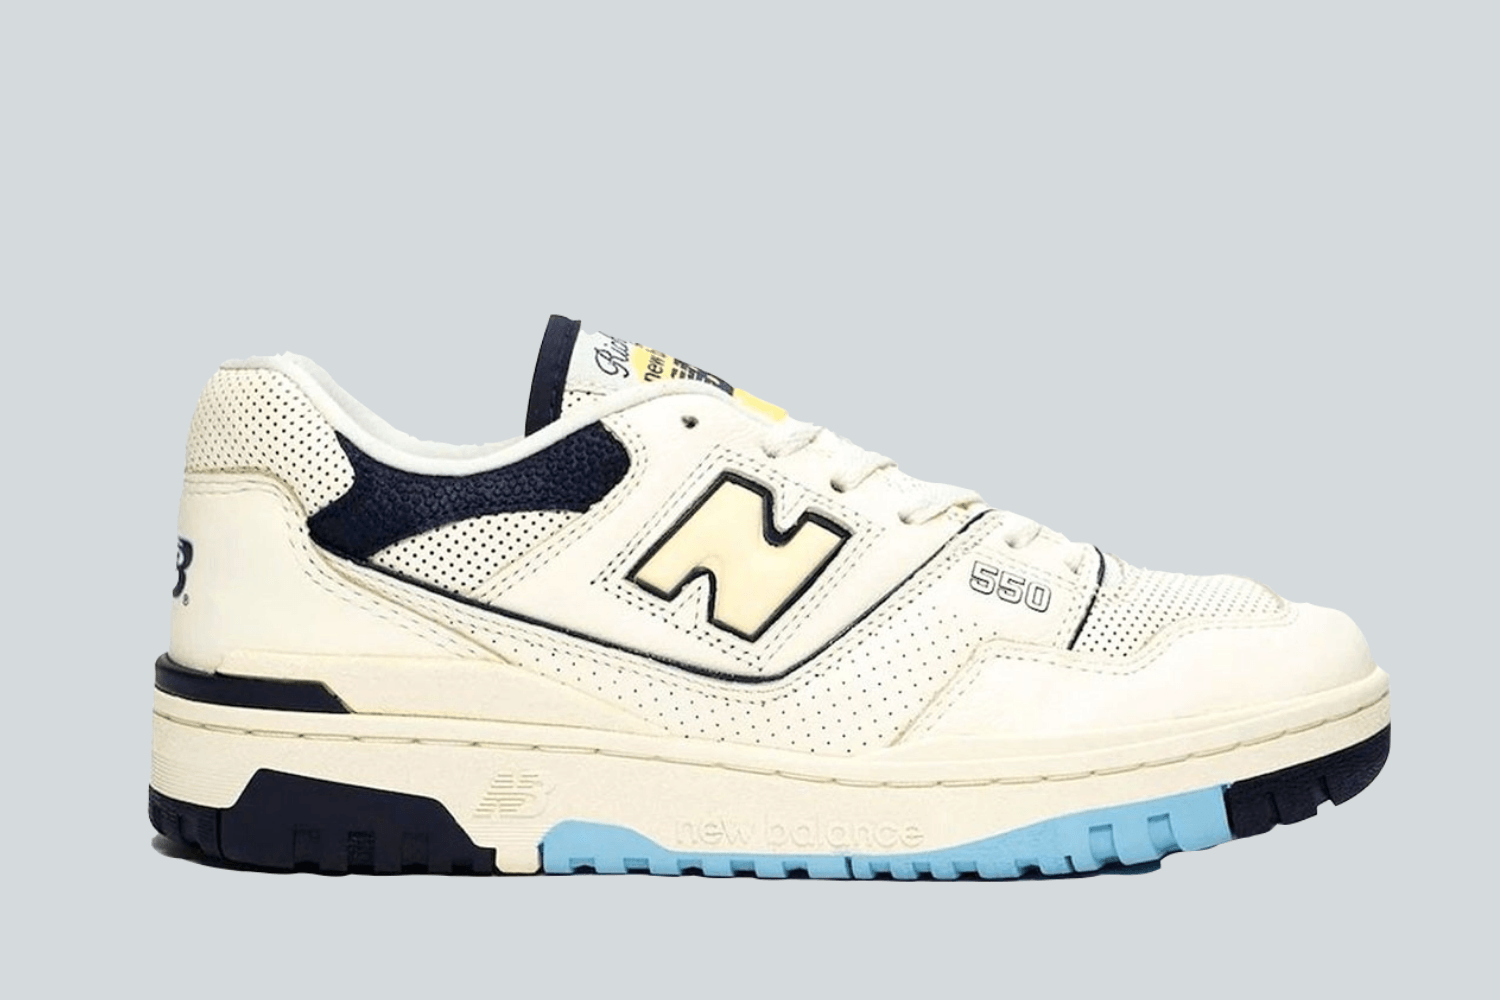 Rich Paul x New Balance 550 to be released soon